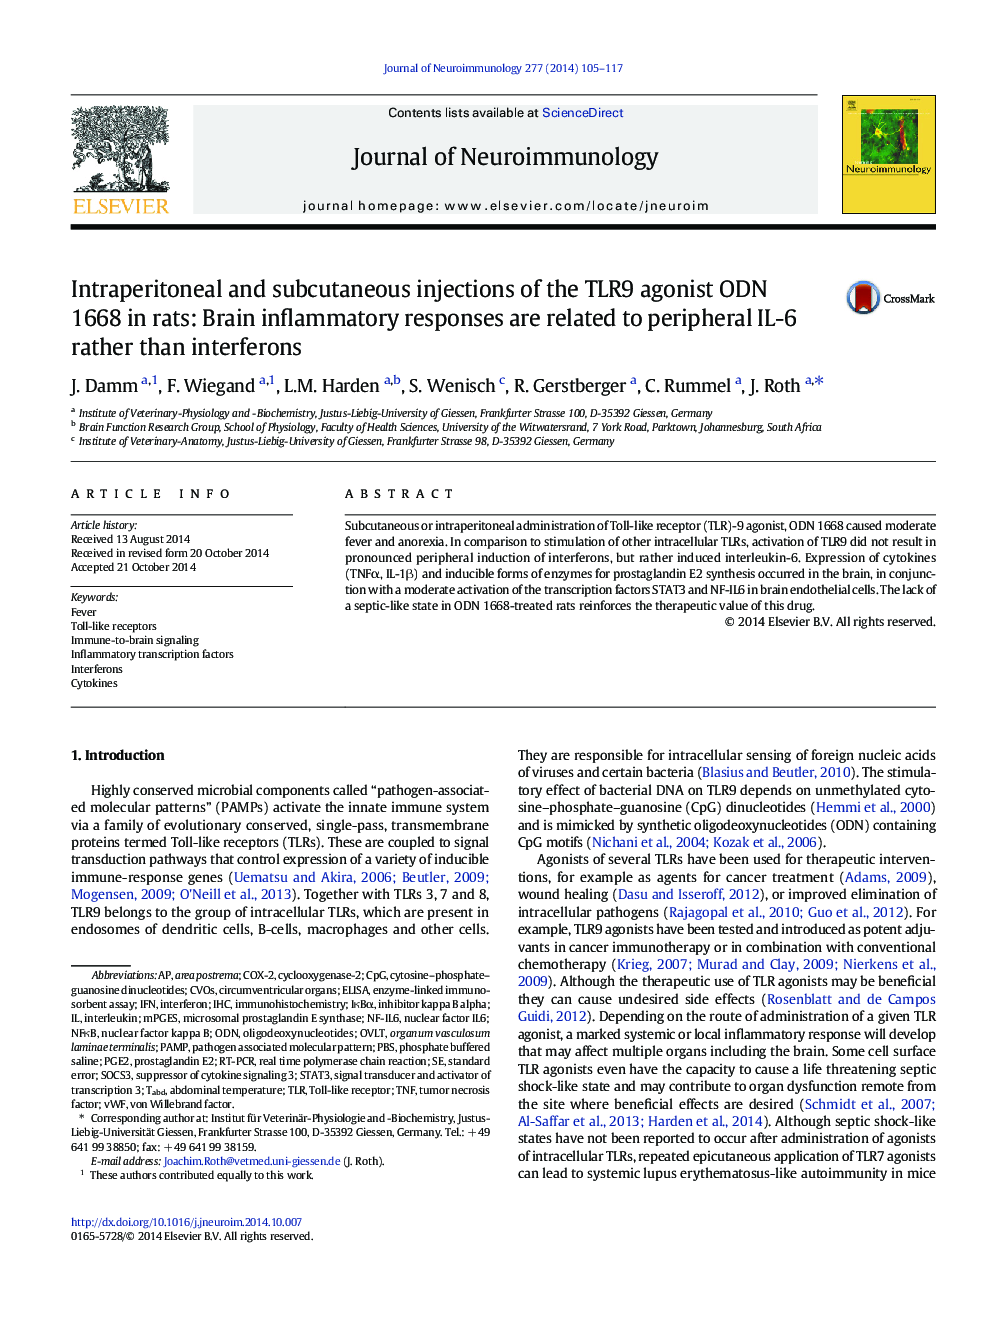 Intraperitoneal and subcutaneous injections of the TLR9 agonist ODN 1668 in rats: Brain inflammatory responses are related to peripheral IL-6 rather than interferons